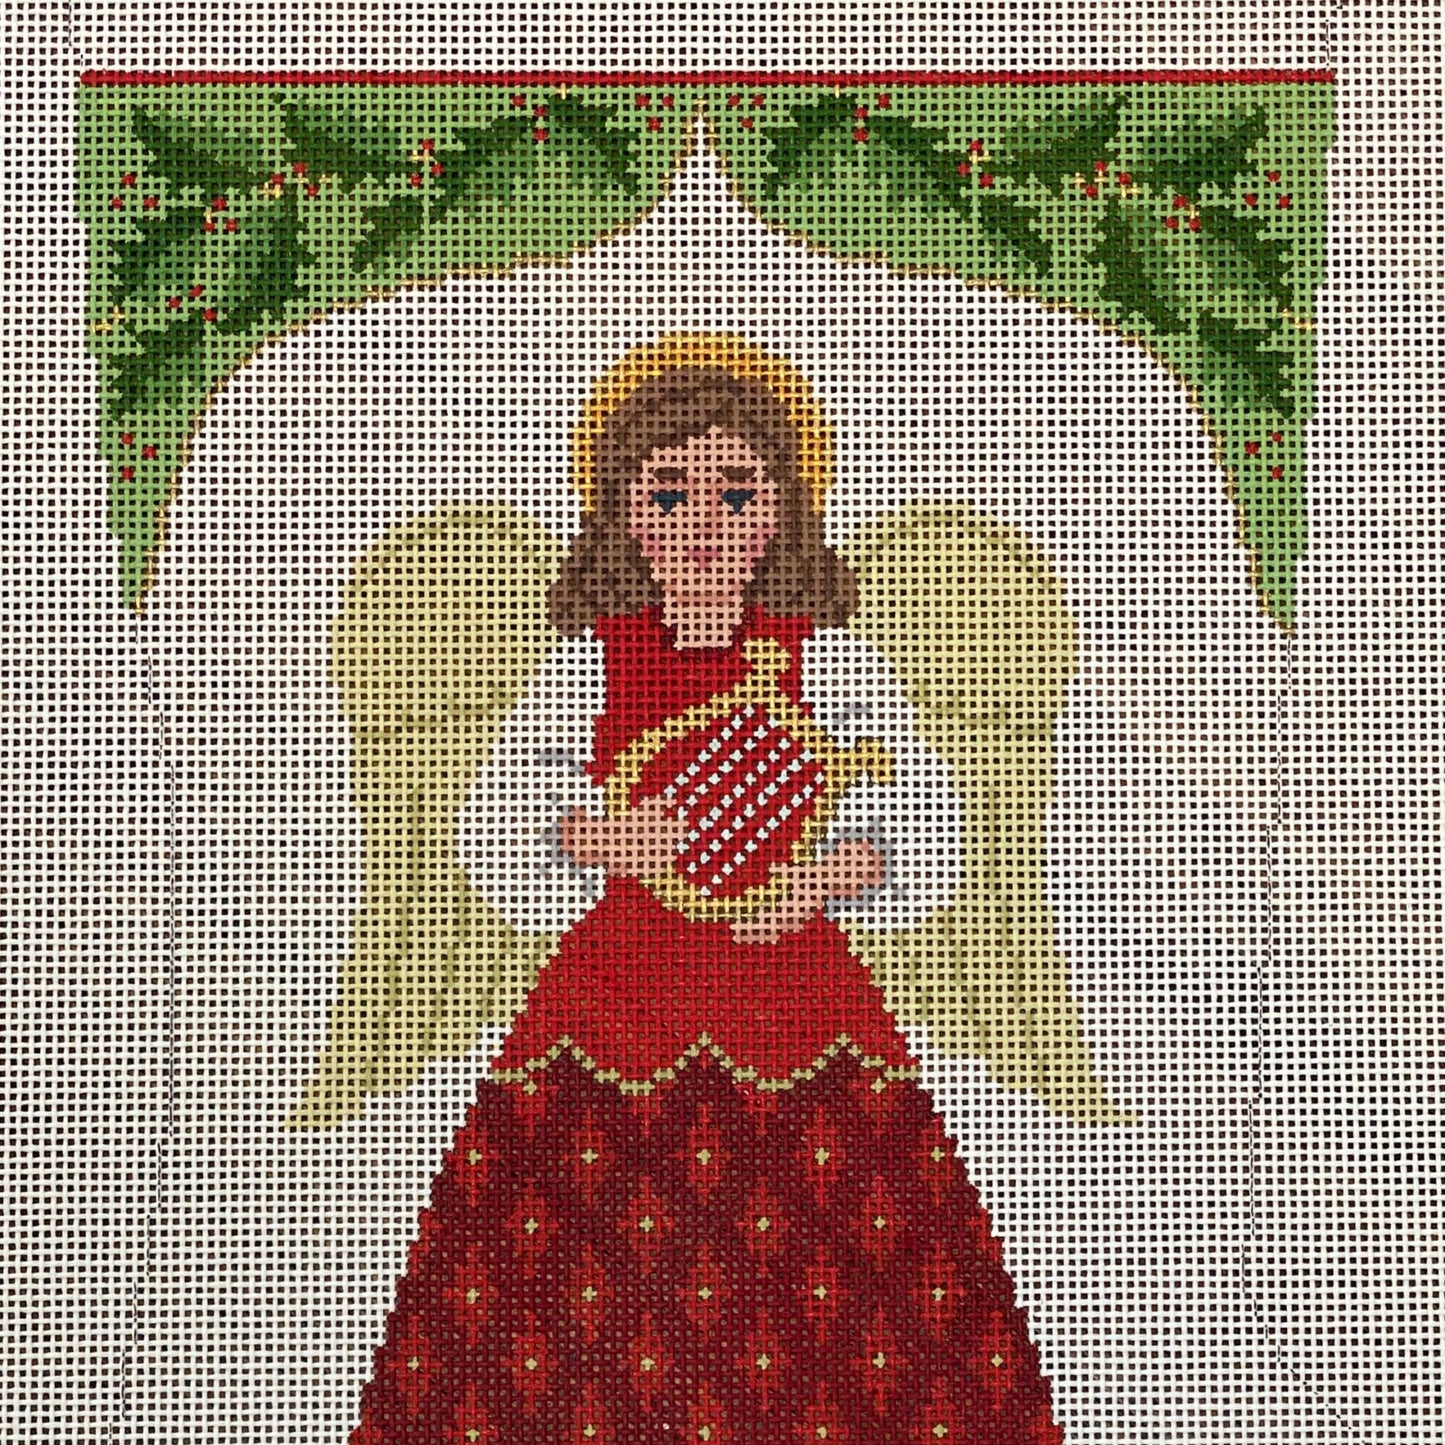 Holly with Angel Stocking Needlecraft Canvas